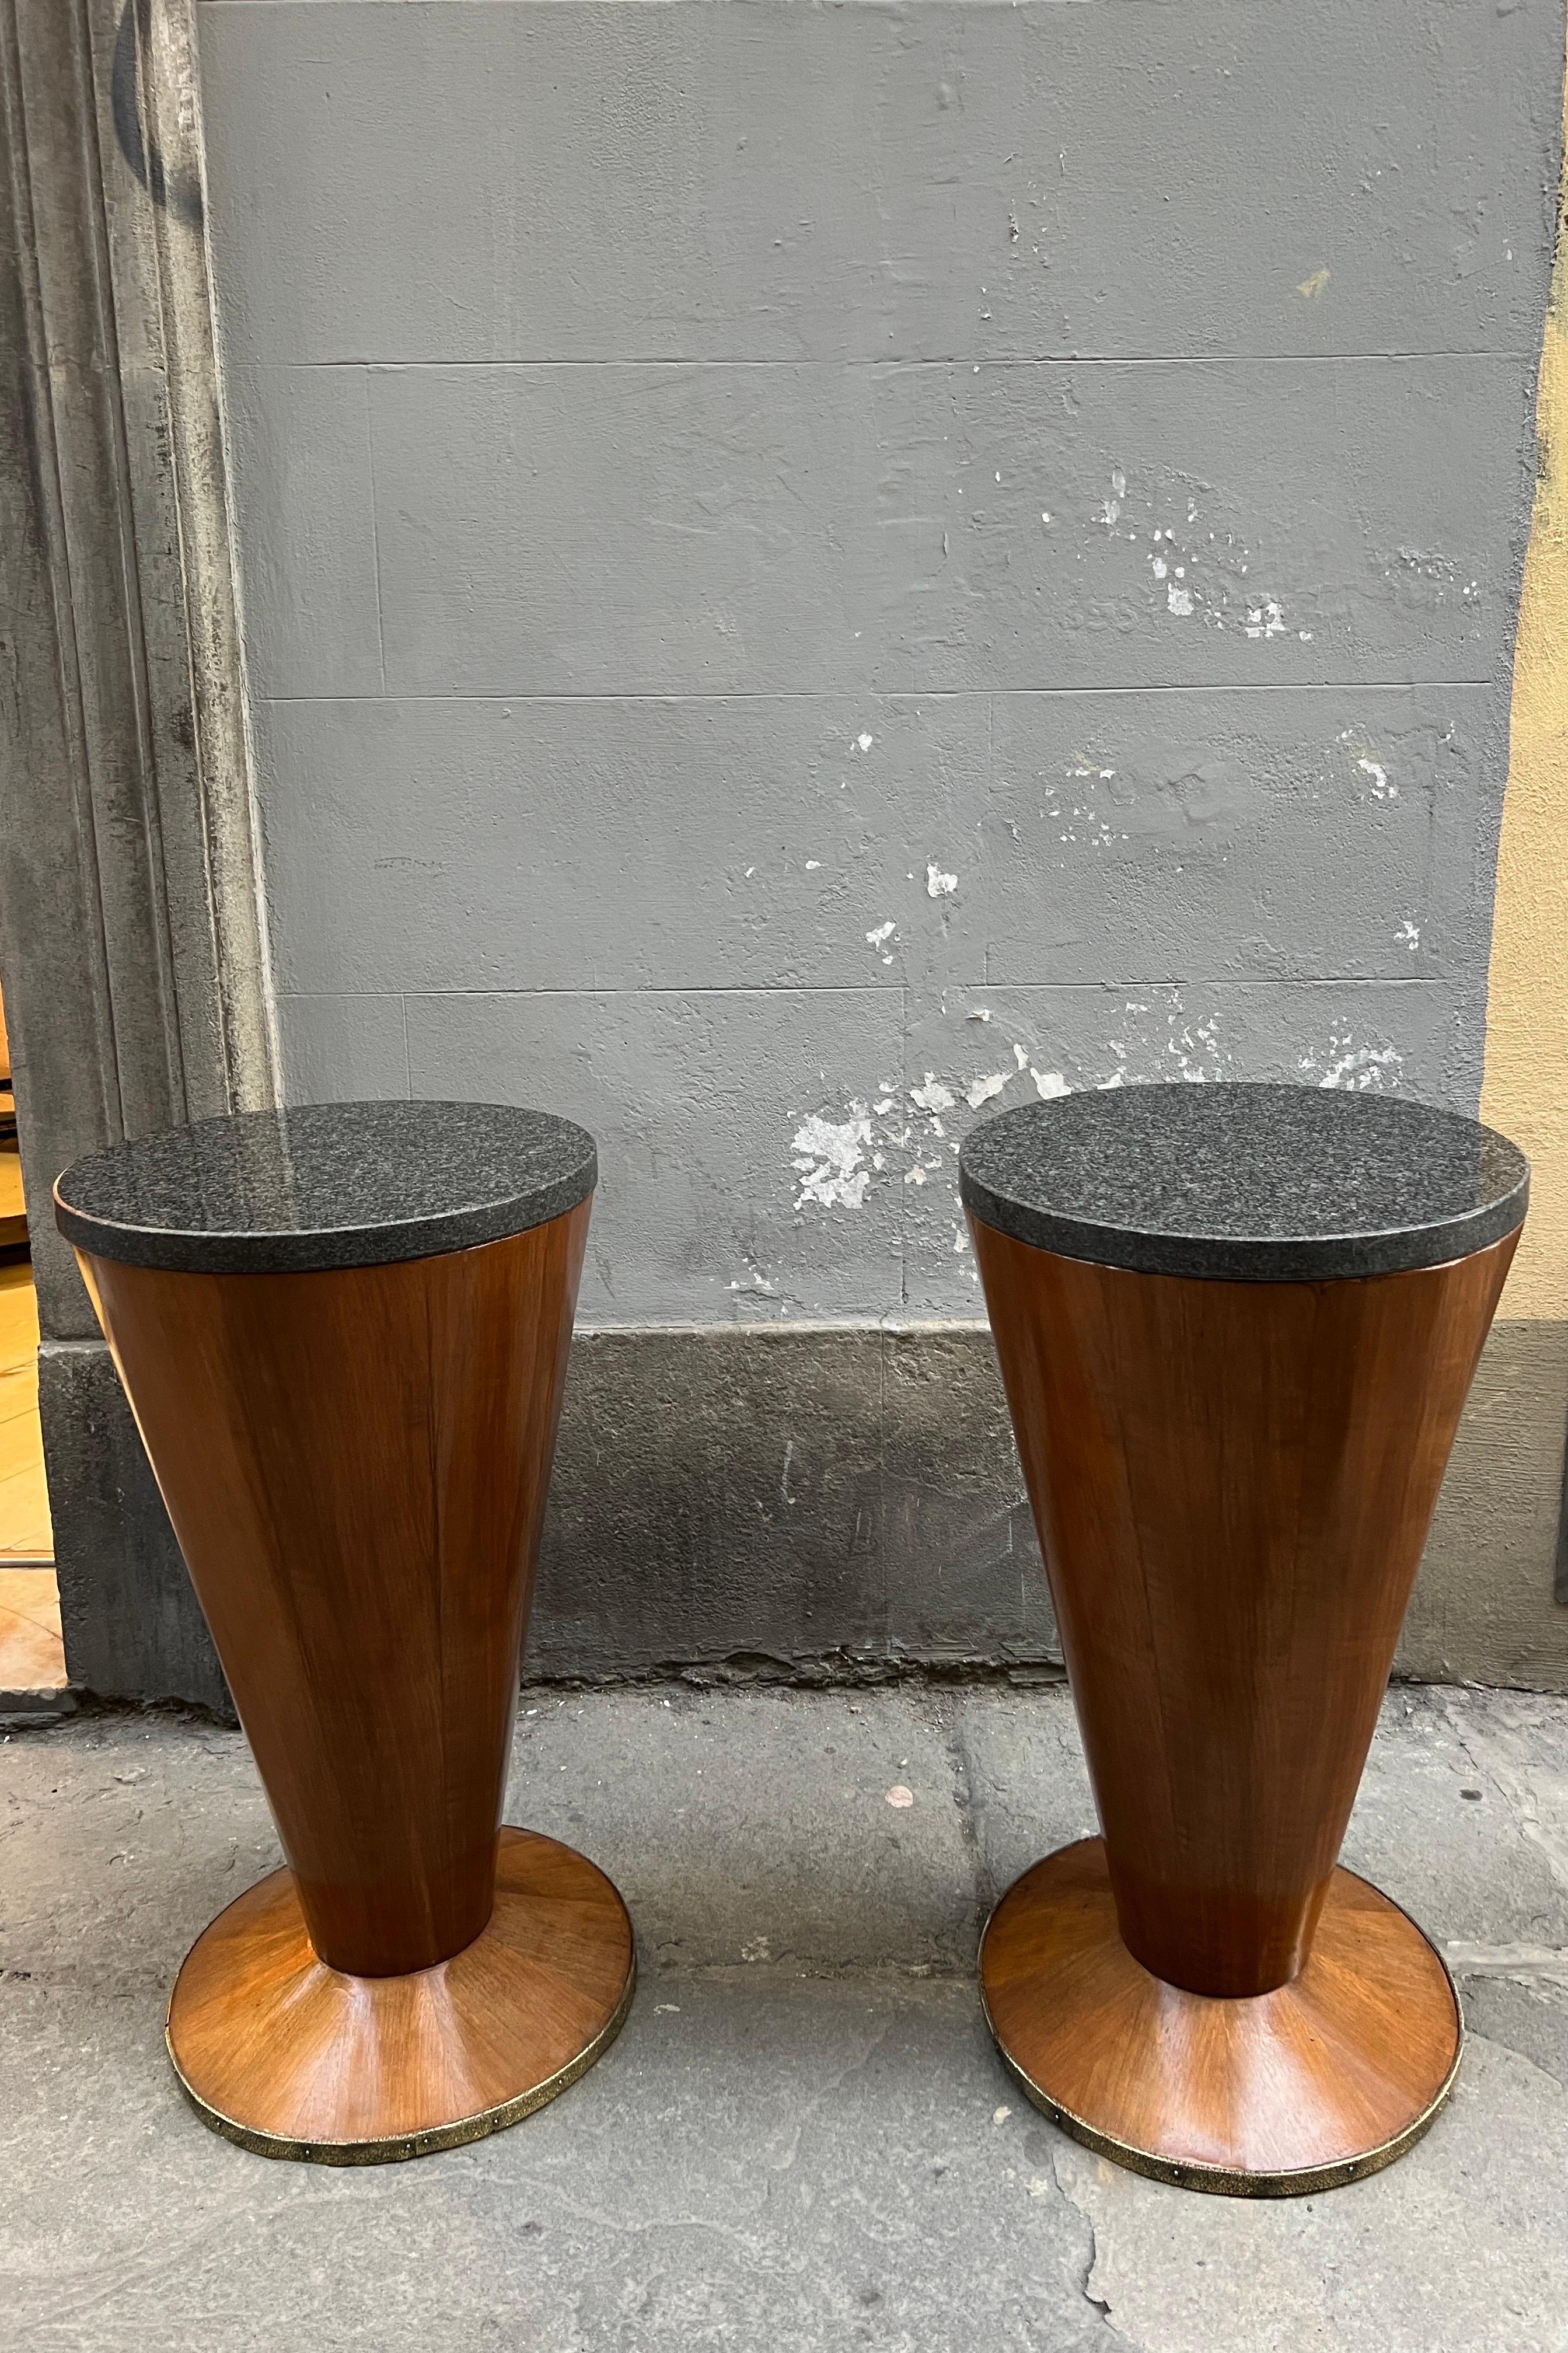 Mid-20th Century Pair of Art Deco Conical Cherry Wood Side Tables with Marble Top 1940s For Sale